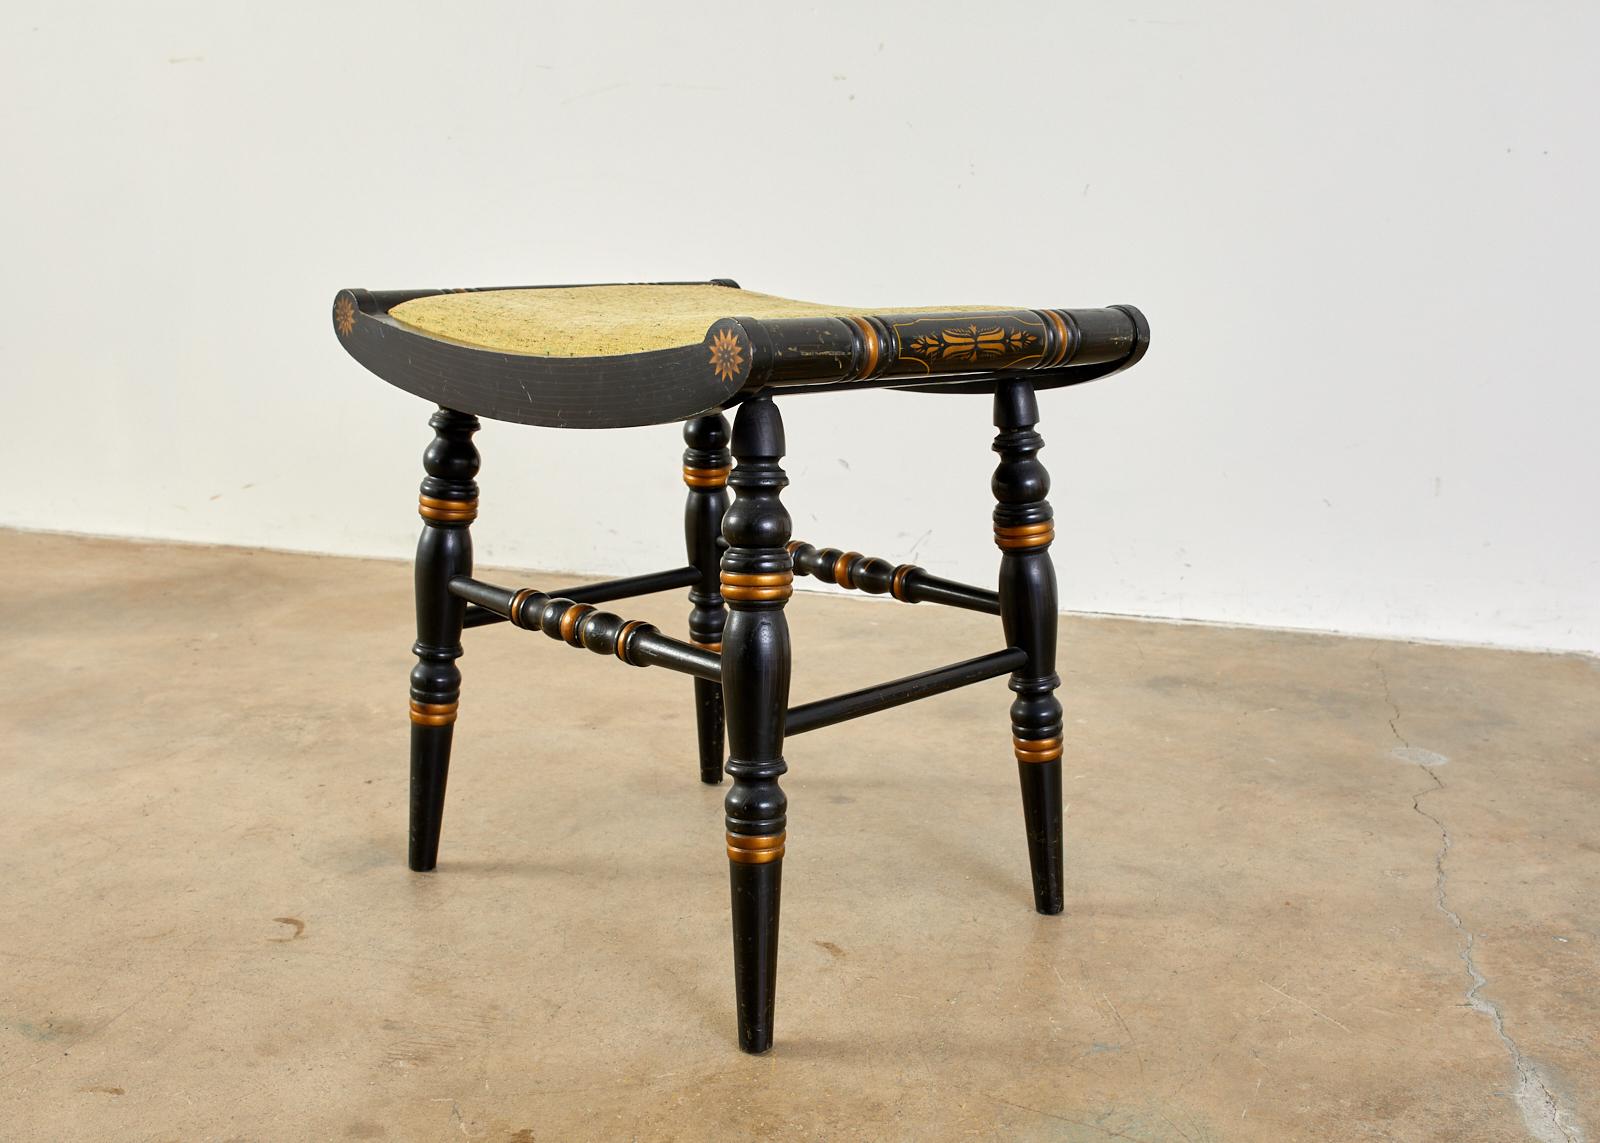 Charming Hitchcock Federal style stool or footstool featuring an ebonized lacquer finish and parcel-gilt stenciling to decorate the chair. Genuine piece made by and signed by Hitchcock with original label affixed on bottom. Curved seat with round